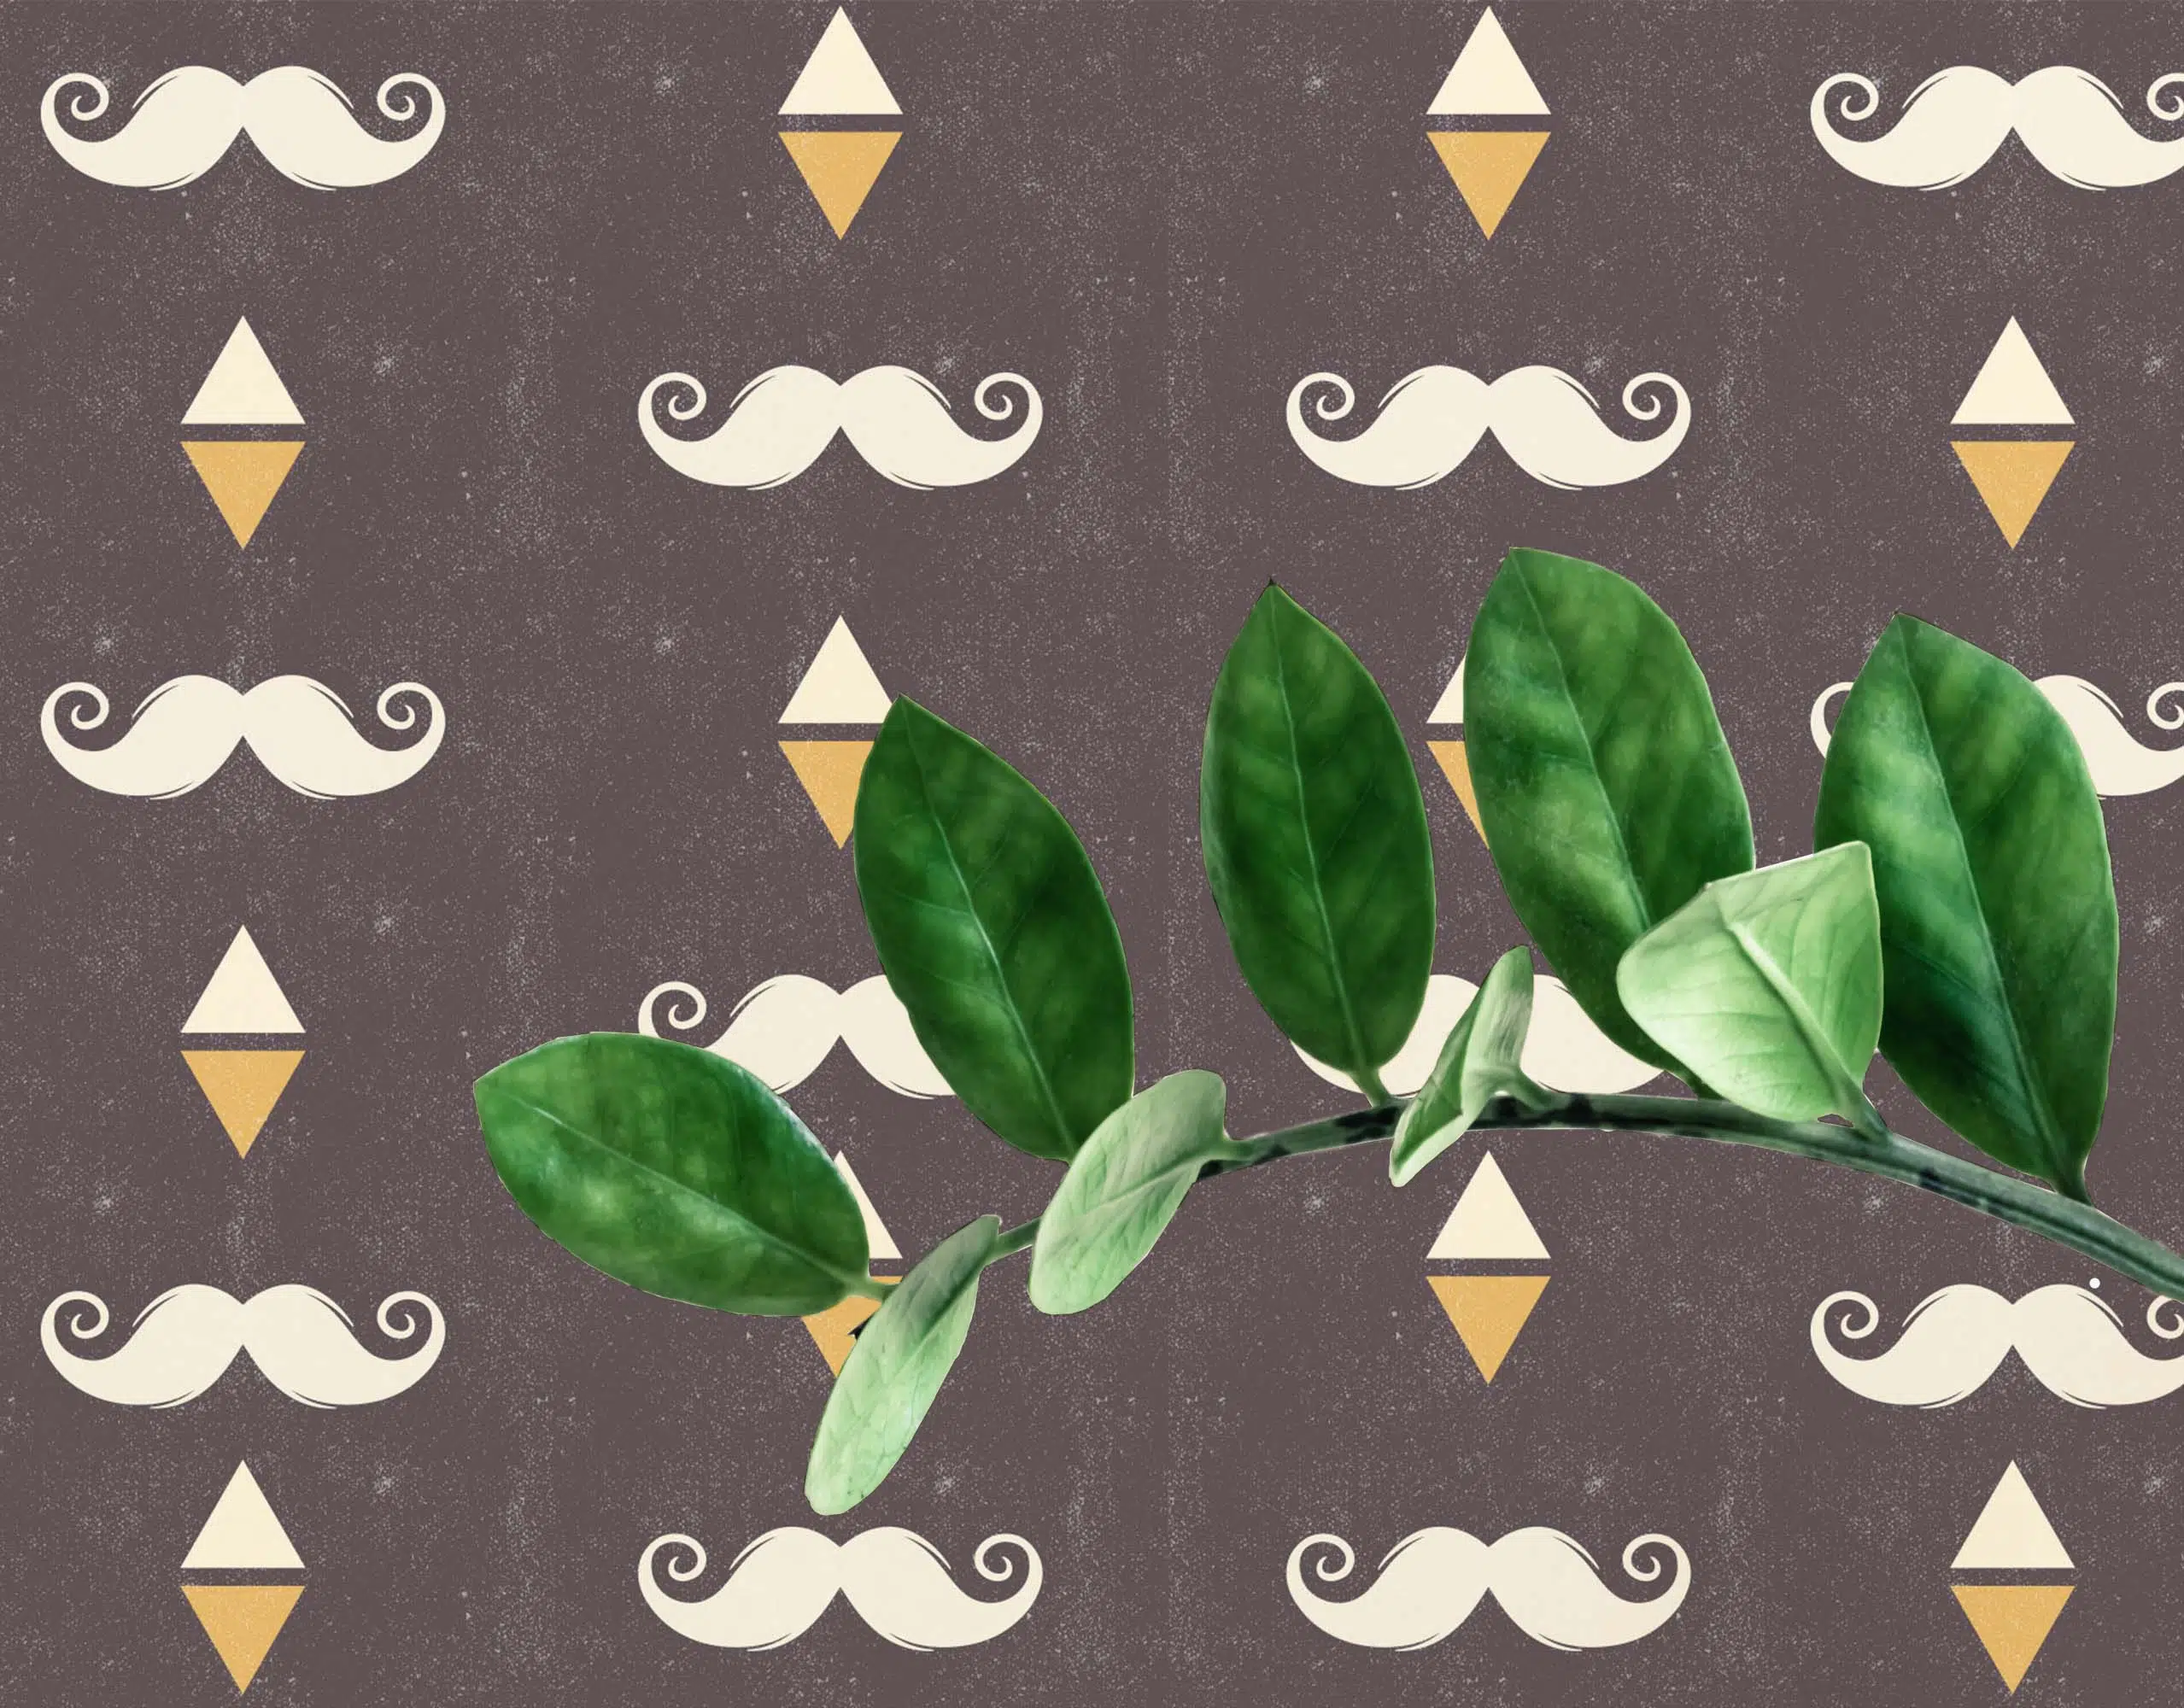 cool mustaches wallpapers